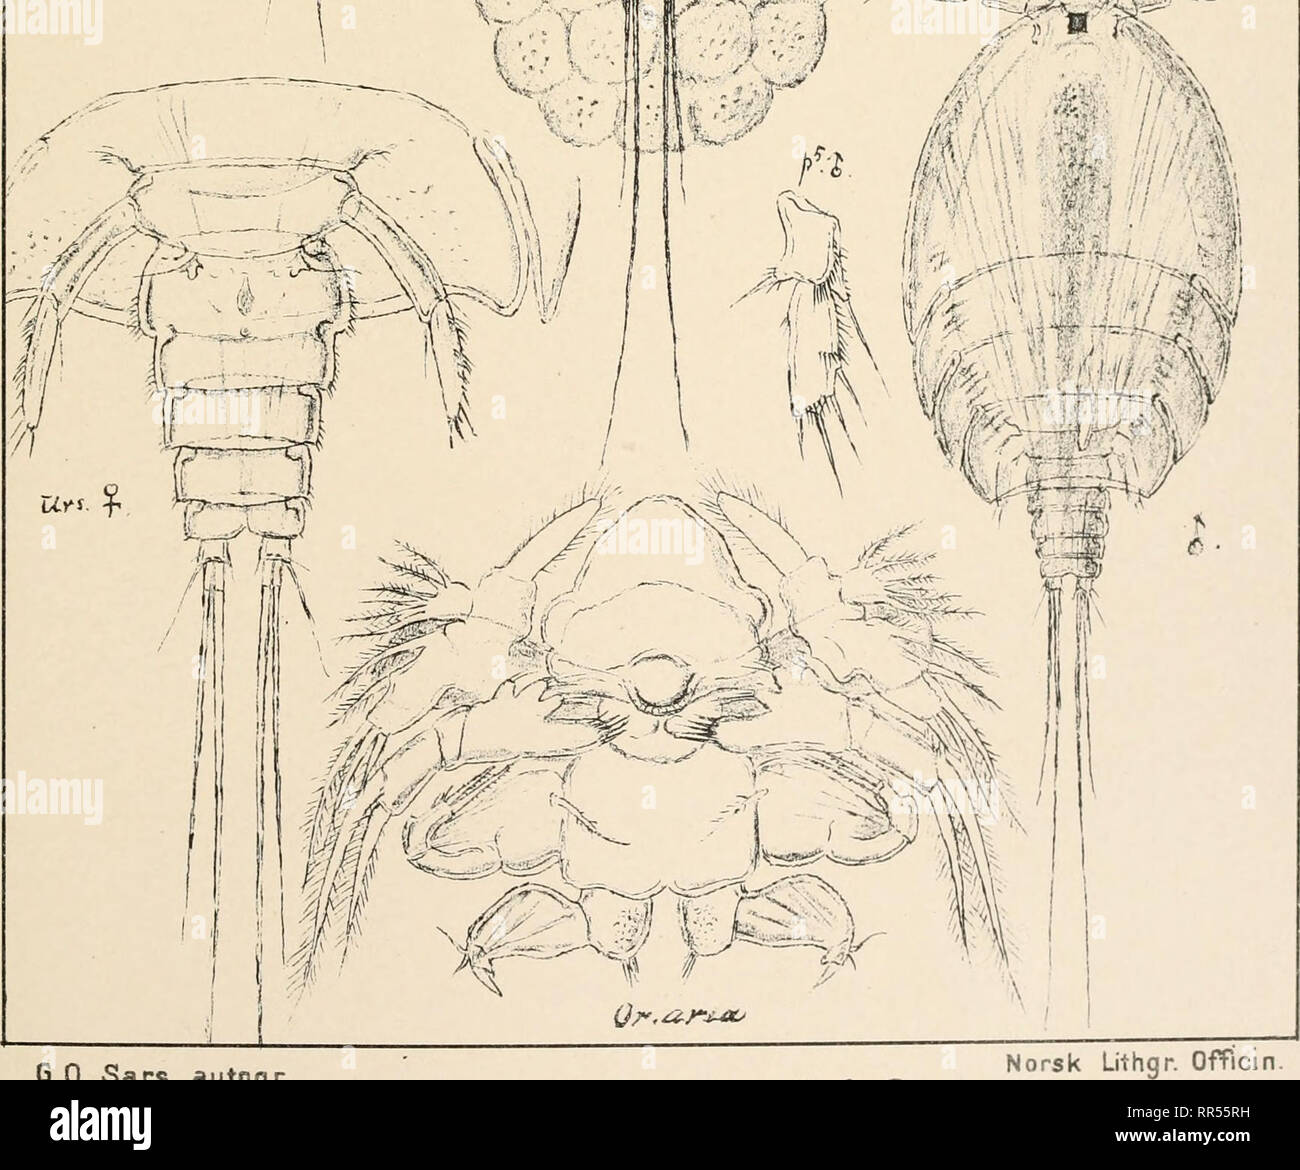 . An account of the Crustacea of Norway, with short descriptions and figures of all the species. Crustacea -- Norway. ''/-?  t ' '/A^f, nnM m  :// /; • ^&quot;^^' ^ 3 //; 1 C- J-^: fS '; / A; ,,' • i -,: -71^^- V* ' ' !• . •' : &quot;• ,• ^i-n-^L^^a- • v &quot; / » ^ r^Tj? i •-'• :' M-il^/^^4 ^- '/ ' r ' ;.-f/ • i ^-w r^^v x--jv M /.-,v . ' -' ^i /./% i I ^;v ' cs p ; '; I I fi ^ •• i! ^ K 1 M Hi S • ; • ' -f M •^ -- ifr^€^ !»•' i SS tfl ---h --4.,, i. G.O.Sars autogr. ^ rt c Aspidiscus Siitorahs, G.O.. Please note that these images are extracted from scanned page images that may have be Stock Photo